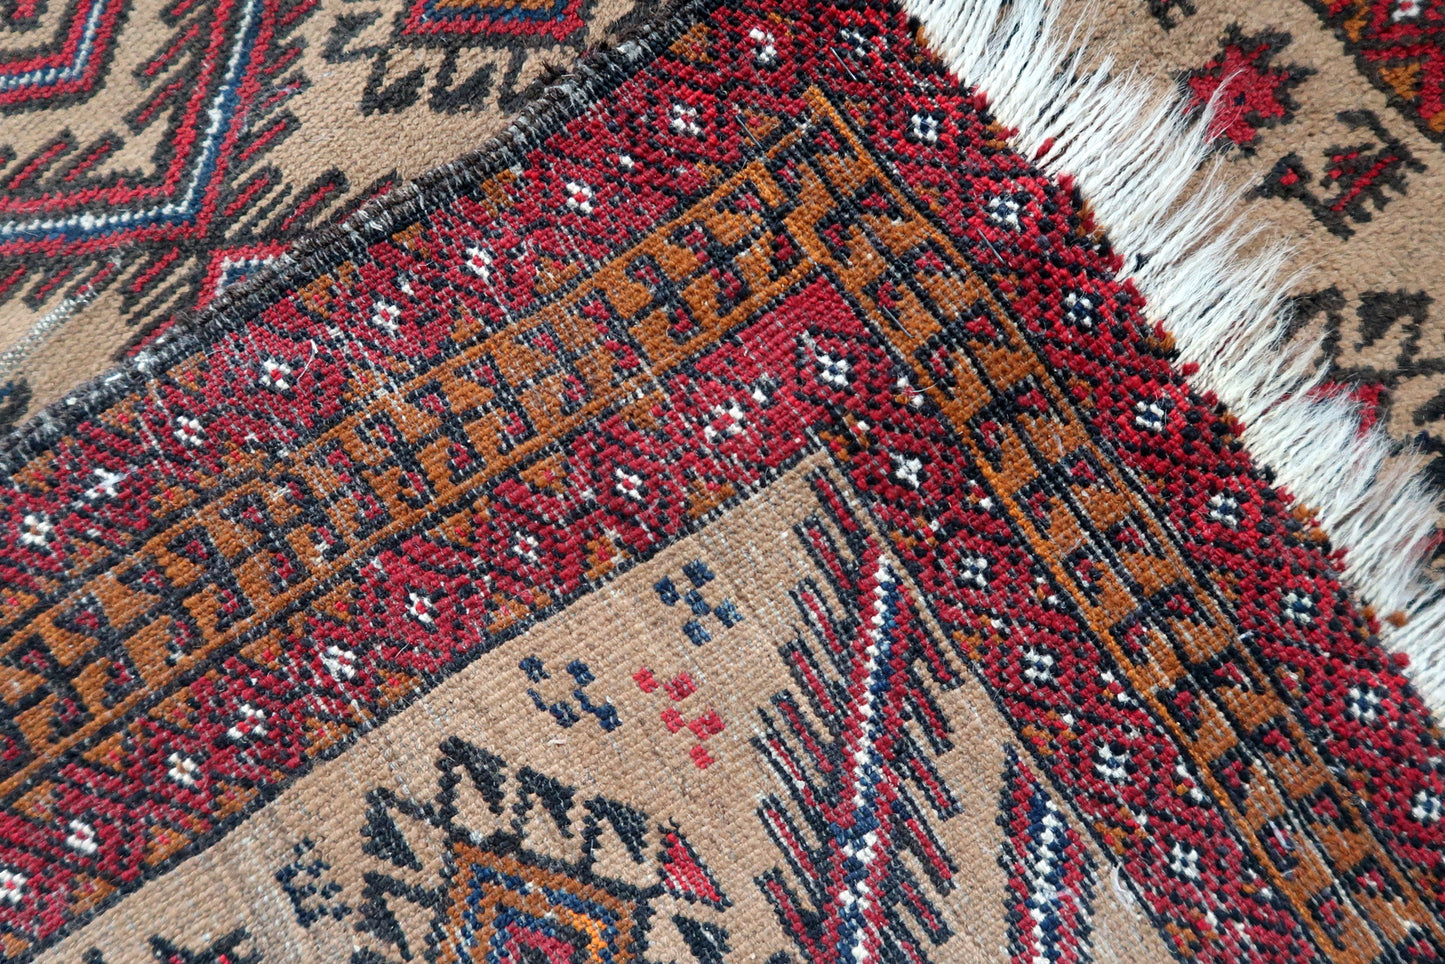 Handmade antique Afghan Baluch rug in tribal prayer design. The rug is from the beginning of 20th century in original condition, it has some low pile.